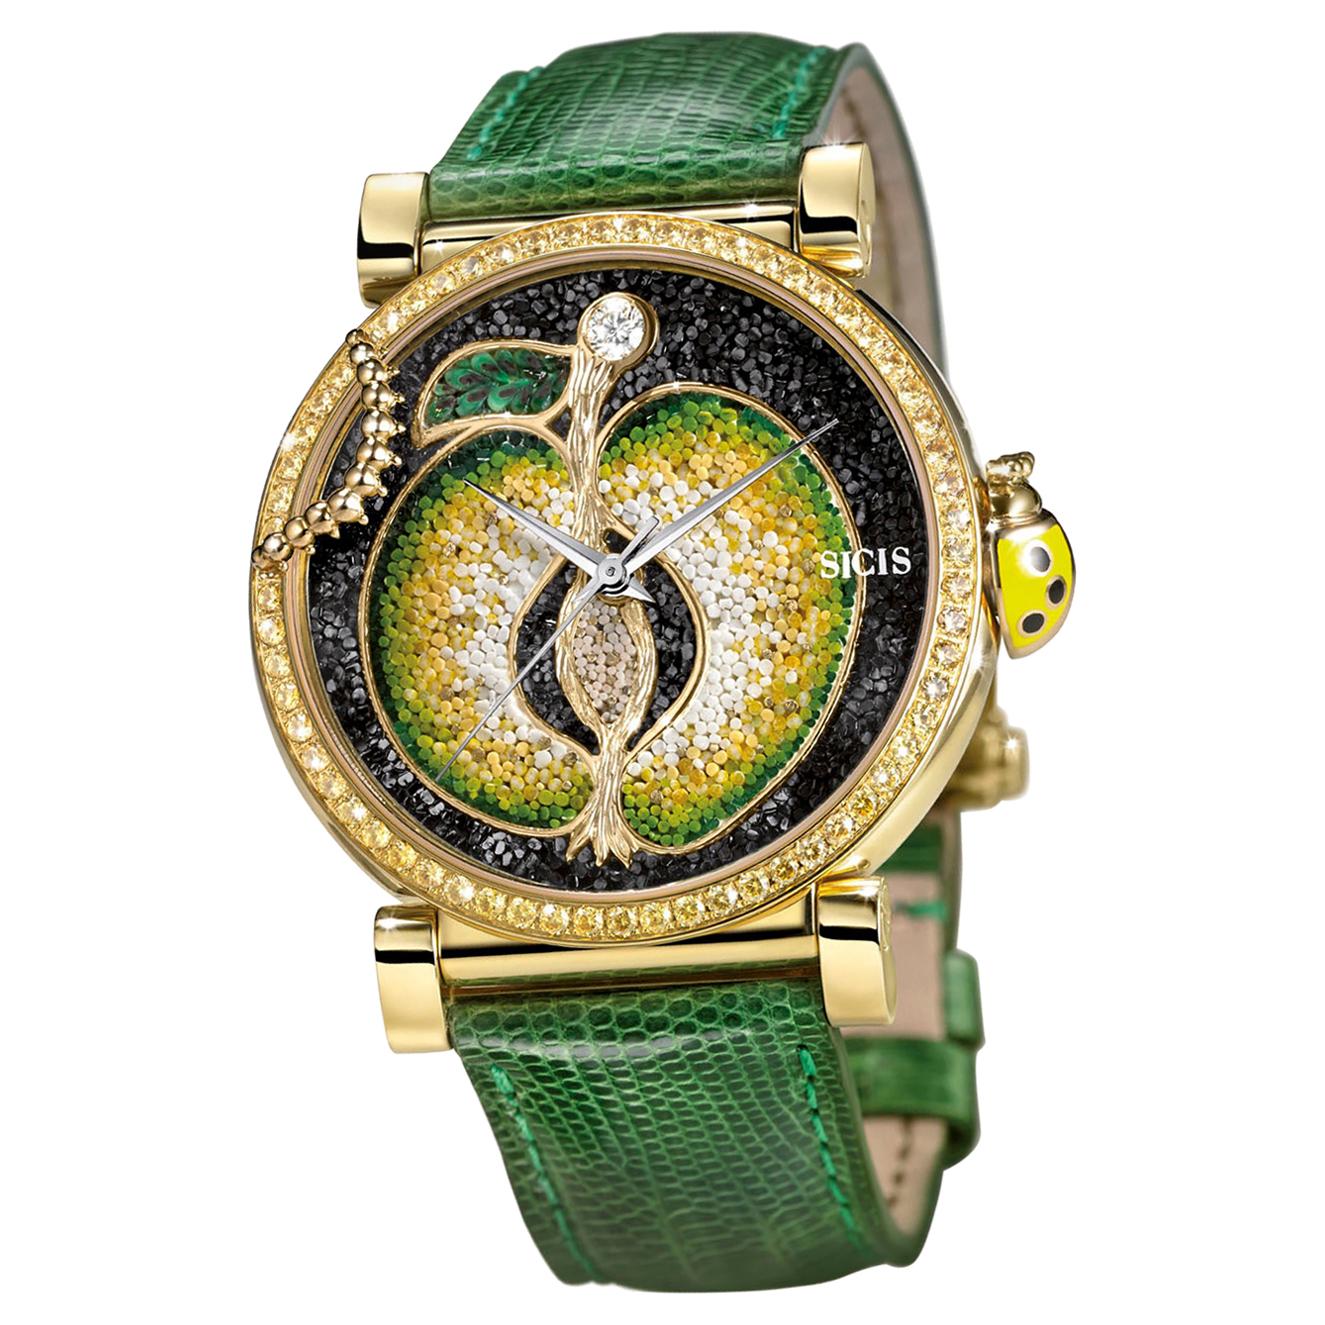 Watch Yellow Gold White Diamond Sapphires Lizard Strap Handdecorated Micromosaic For Sale